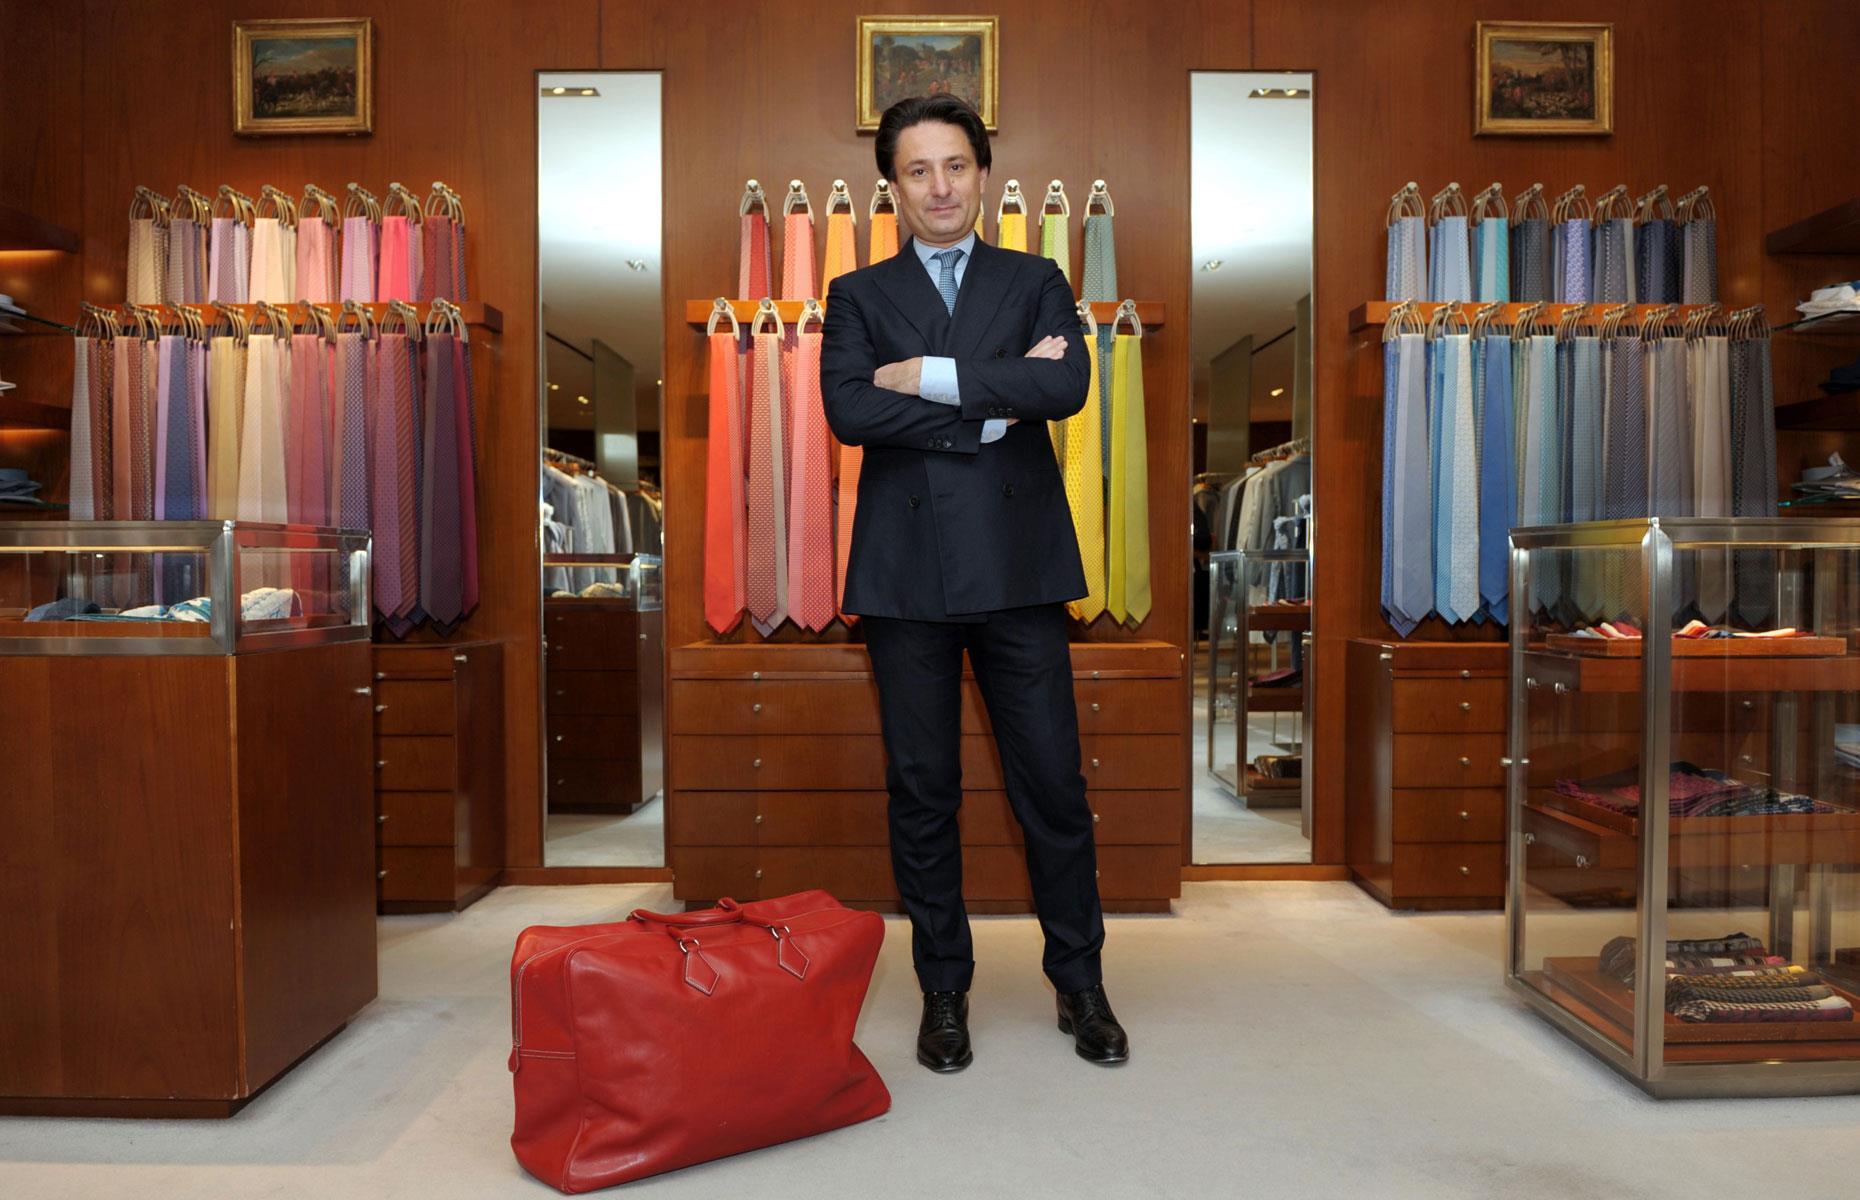 <p>The owners of French luxury goods firm Hermès, the Dumas family have an estimated combined fortune of $49.2 billion, according to the most recent figures from <em>Bloomberg</em>.</p>  <p>The clan's company was founded by patriarch Thierry Hermès in 1837 and started out as a Parisian harness workshop, before branching out into the high-end fashion and luxury goods business.</p>  <p>Notable scions of the family include the late Jean-Louis Dumas, who transformed the firm into a global powerhouse, and Axel Dumas, the current CEO (pictured).</p>